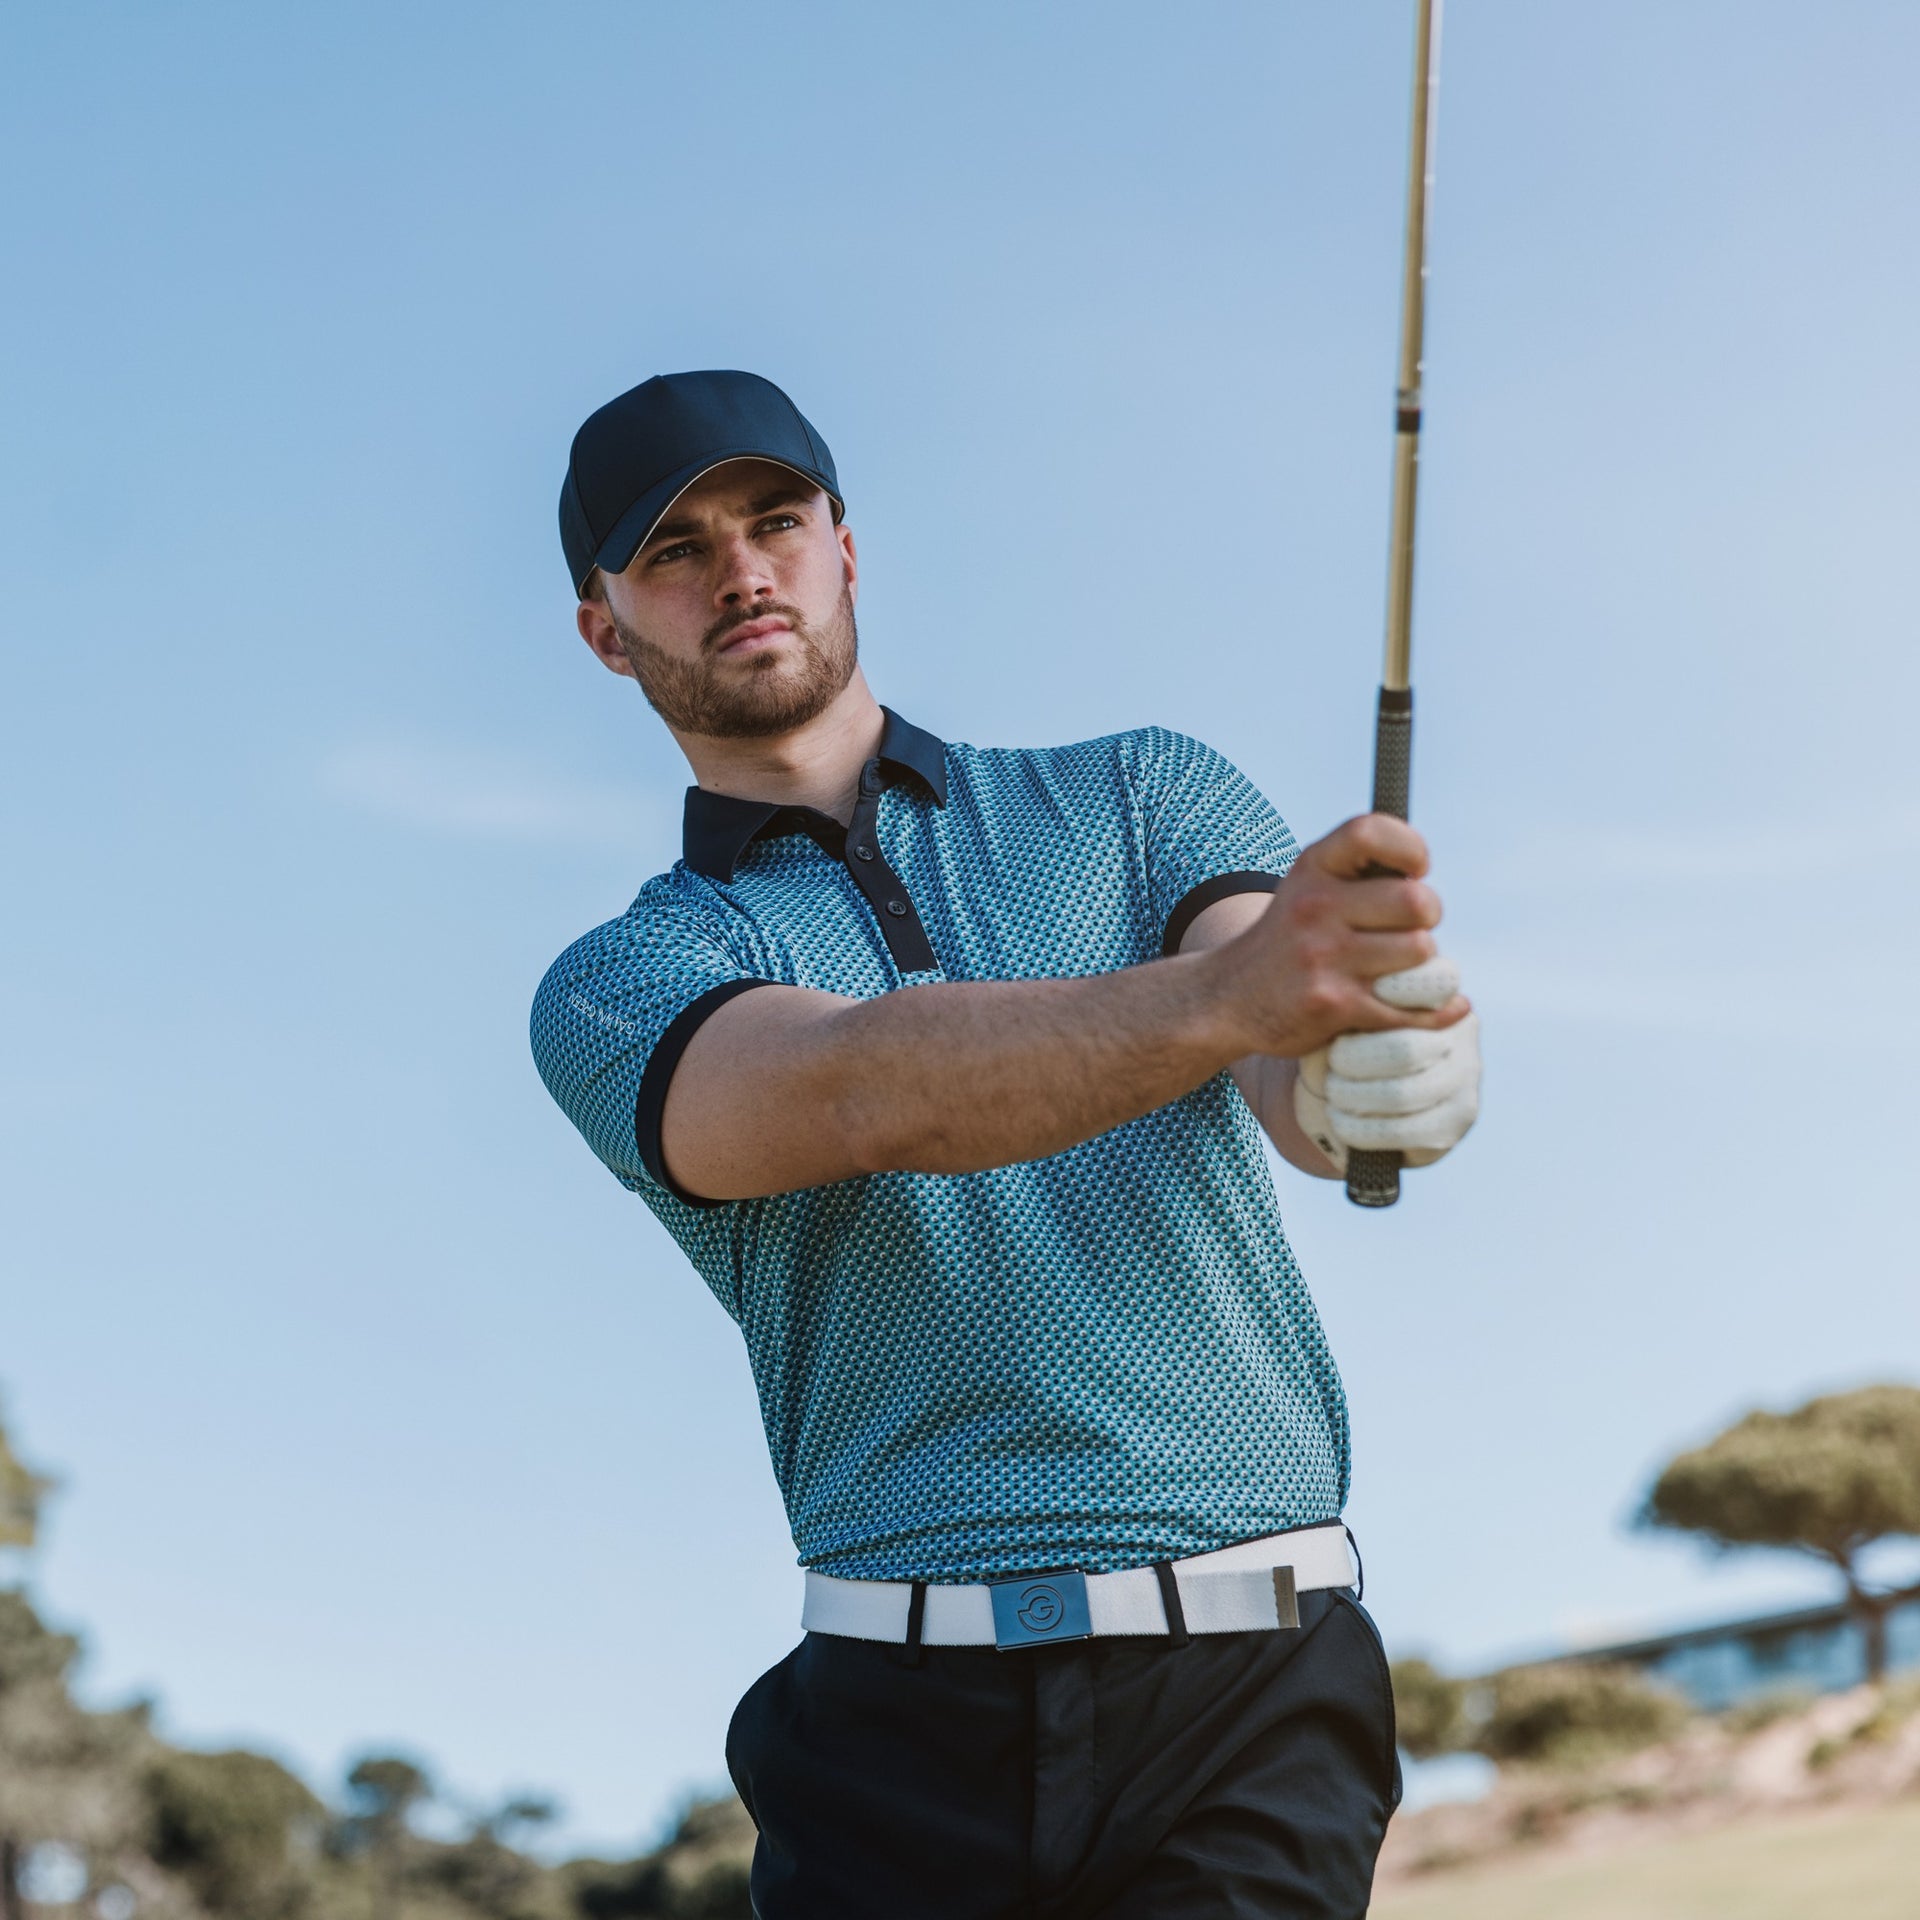 Golf clothing store - Premium golf apparel by Galvin Green